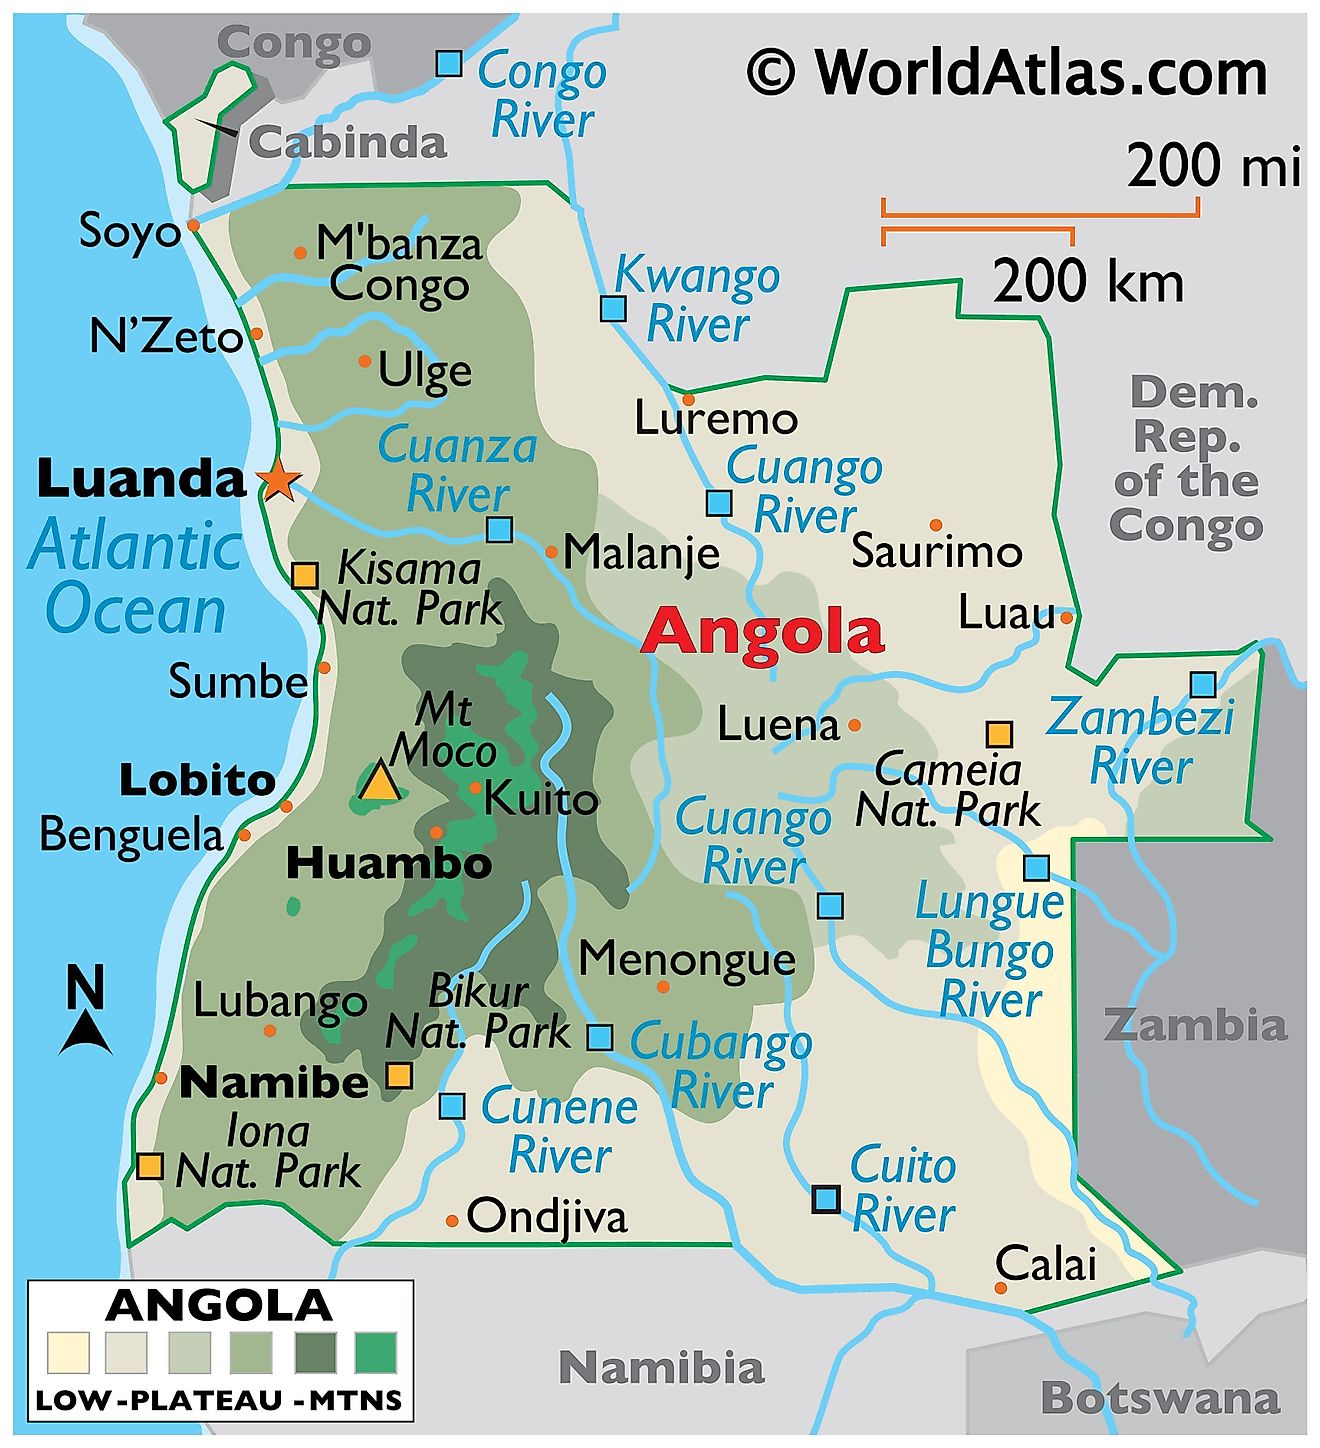 Physical map of Angola showing its major national parks, cities, and rivers. Displayed on the map is the highest point Mount Moco as well as its capital city of Lunda. Also featured are Angola's international boundaries.